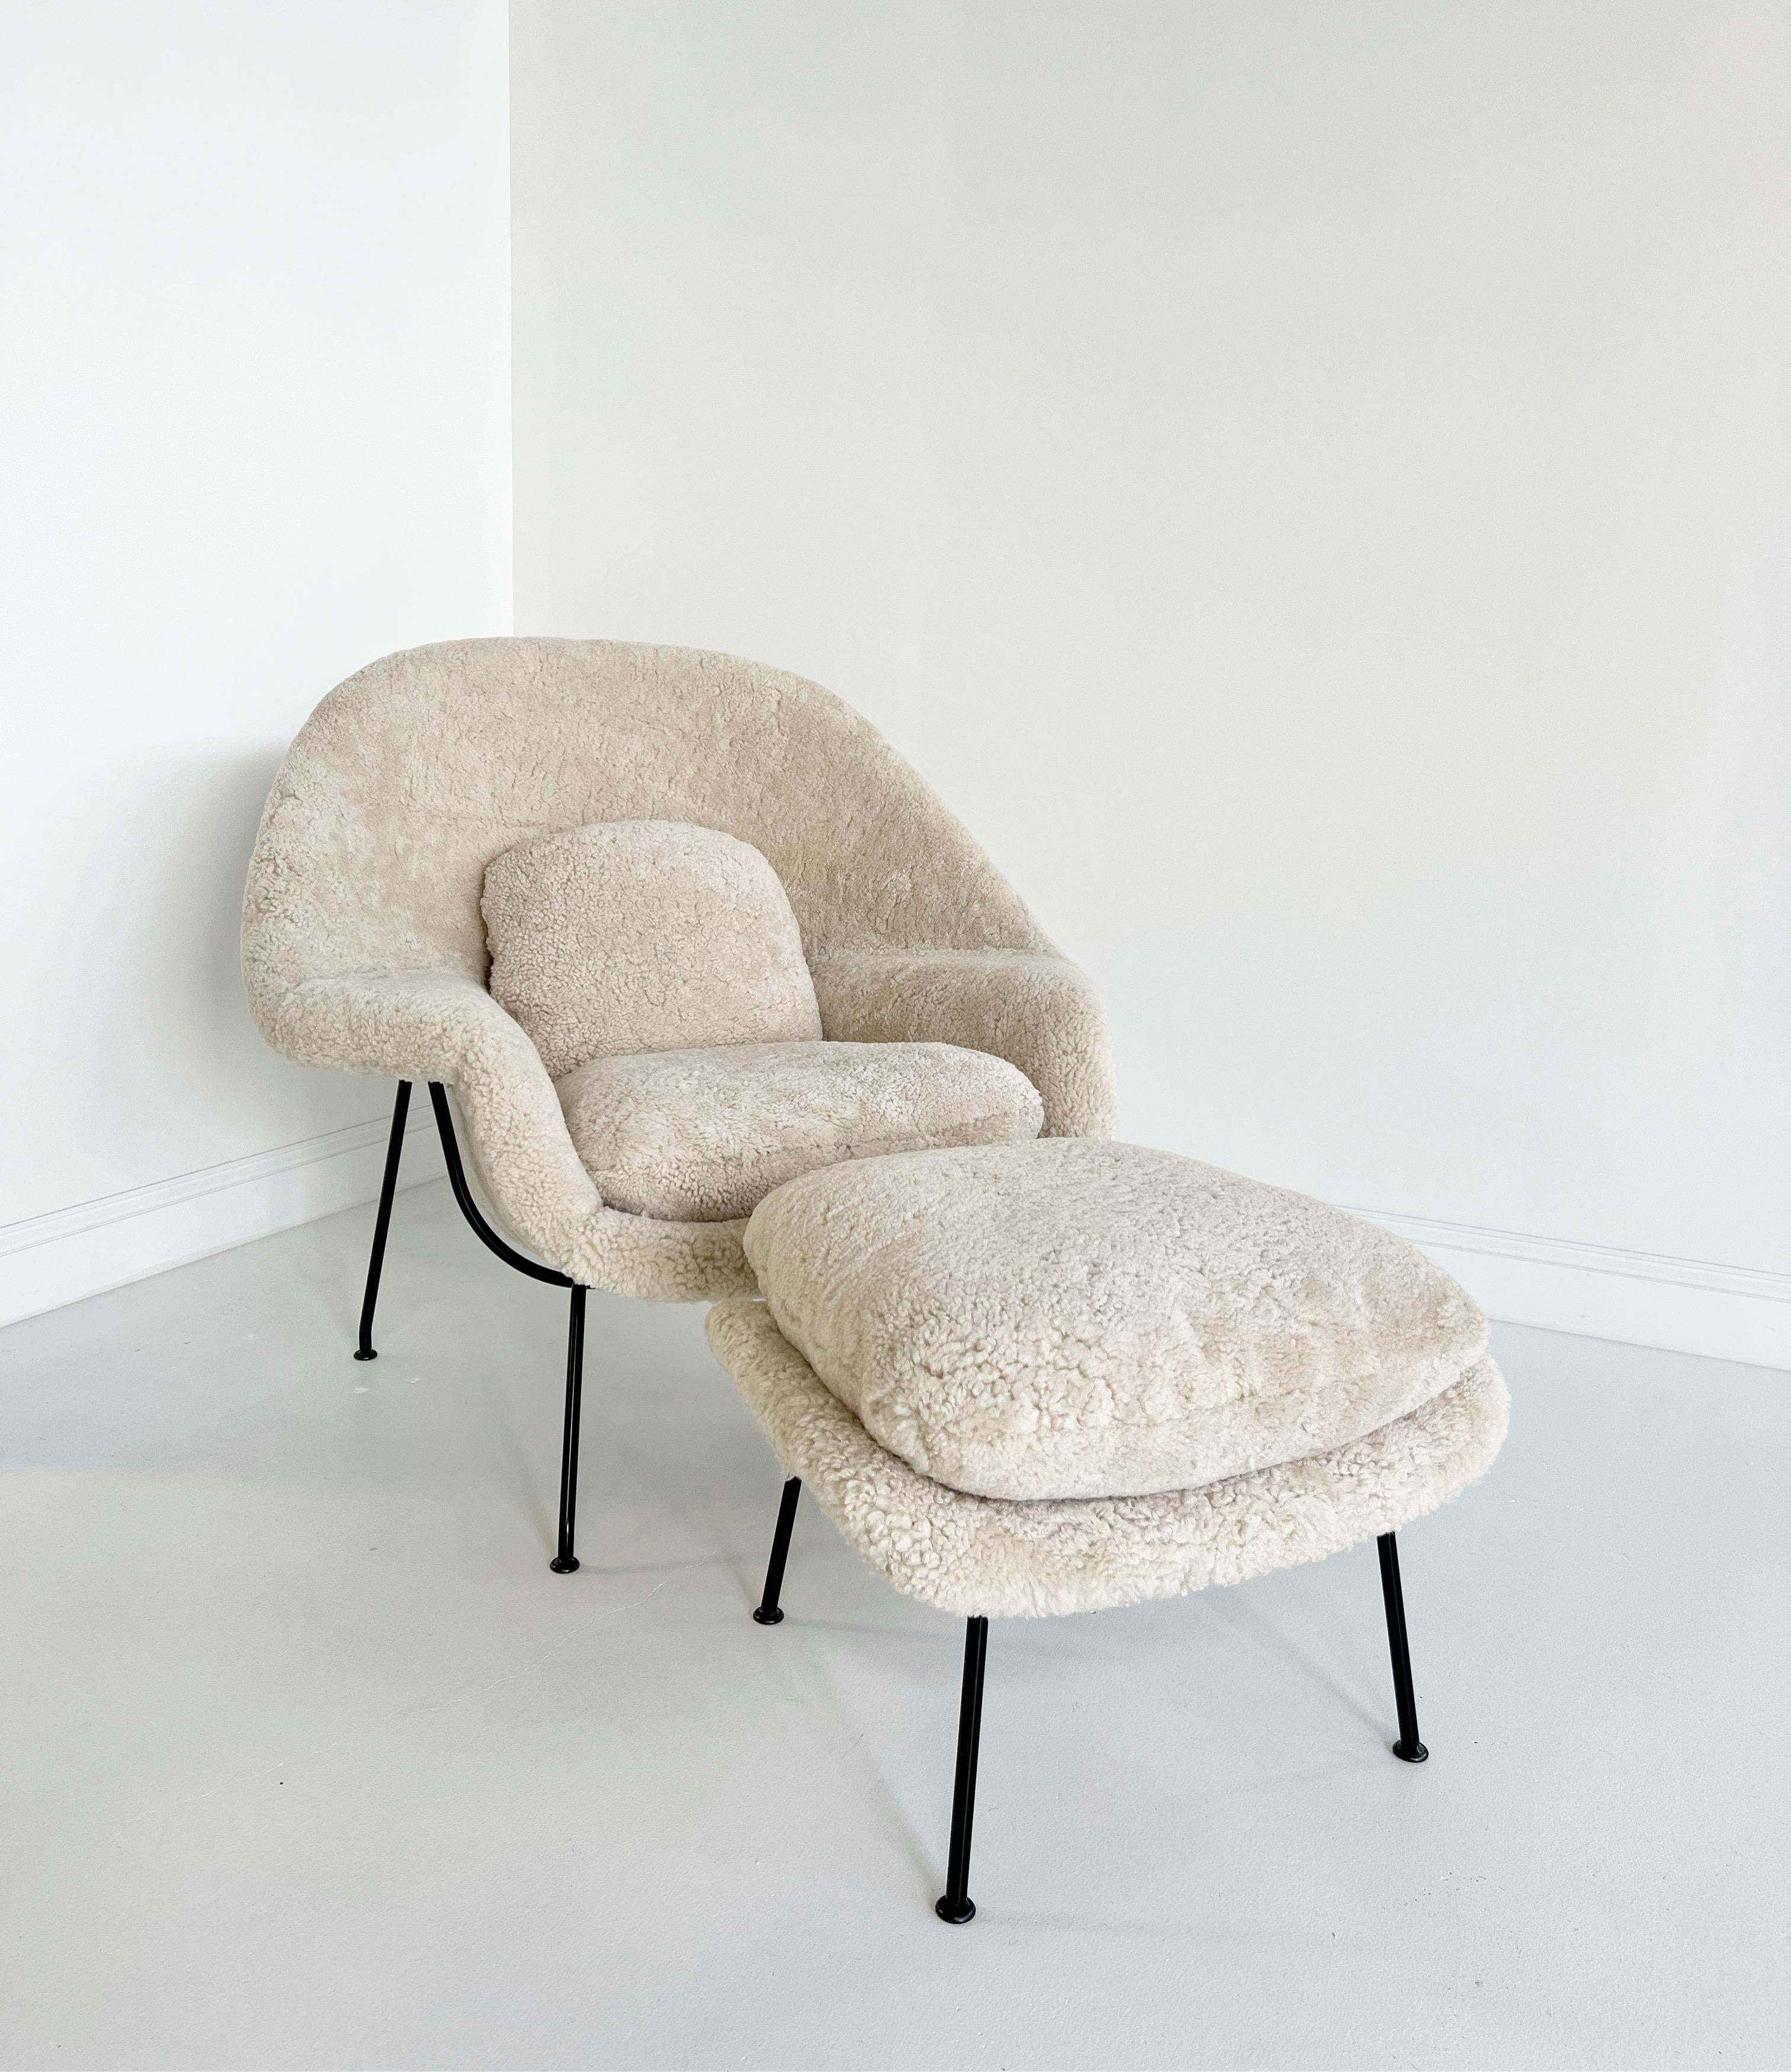 Forsyth Bespoke Eero Saarinen Womb Chair and Ottoman in Shearling In Excellent Condition For Sale In SAINT LOUIS, MO